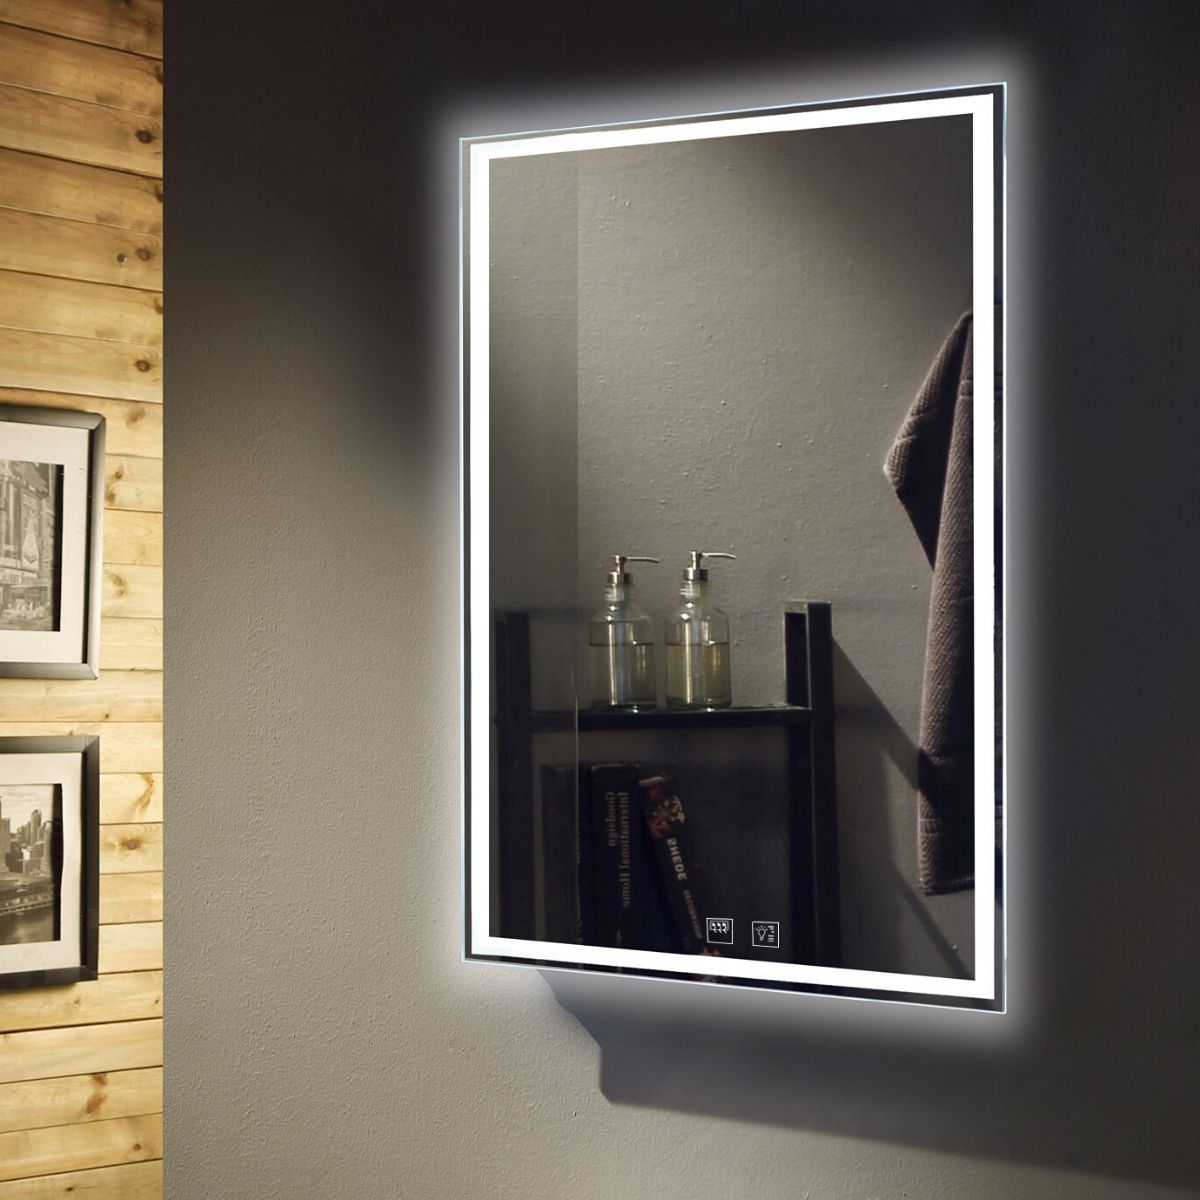 View Colour Adjustable LED Bathroom Mirror With Demister Pad information